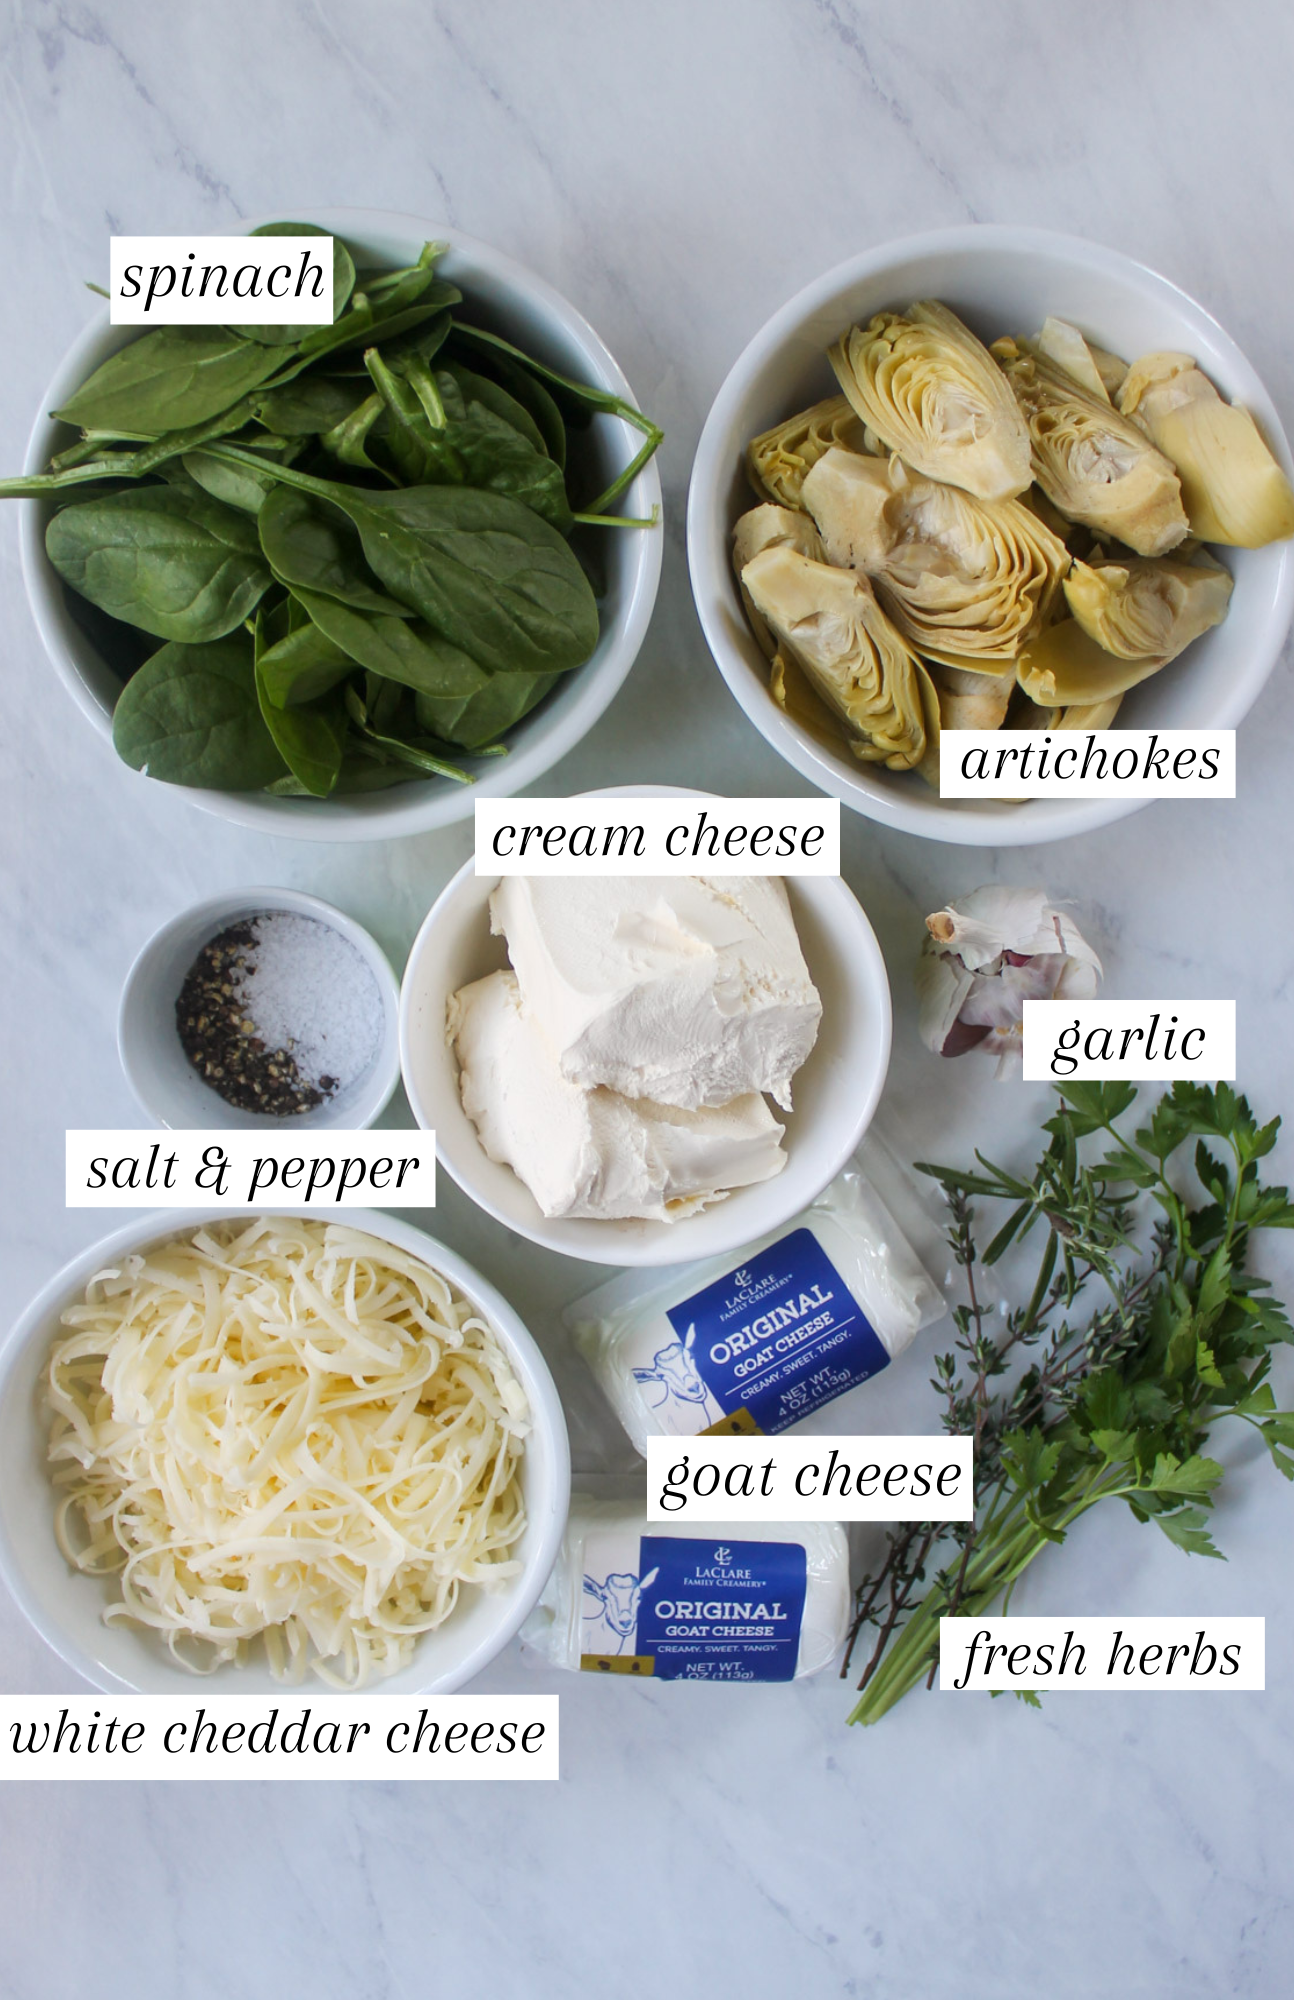 Labeled ingredients for Goat Cheese Artichoke Dip.